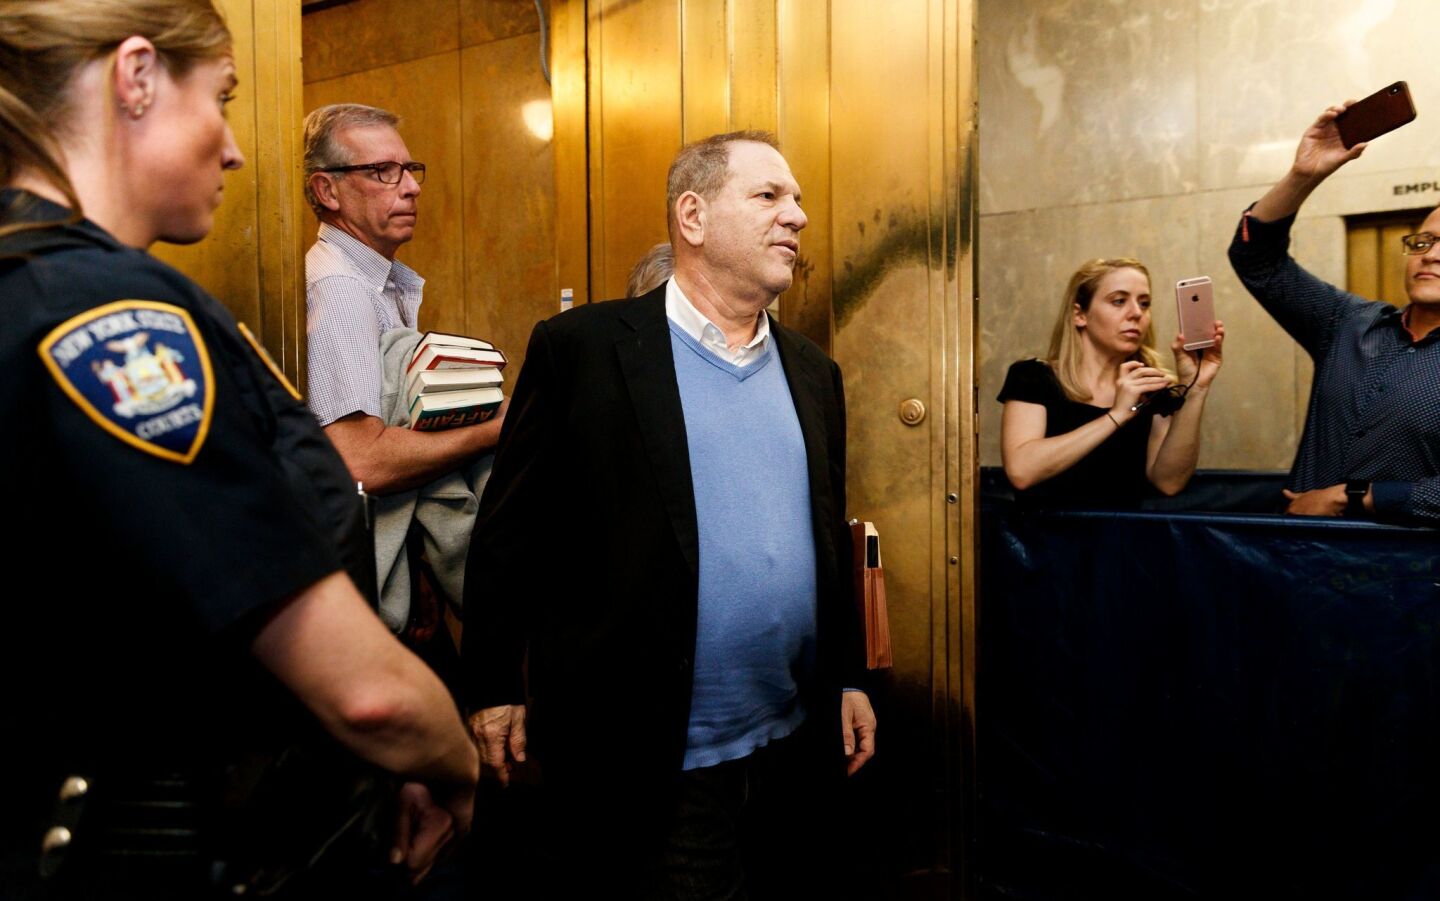 Harvey Weinstein leaves court after being charged with multiple sex crimes in New York.